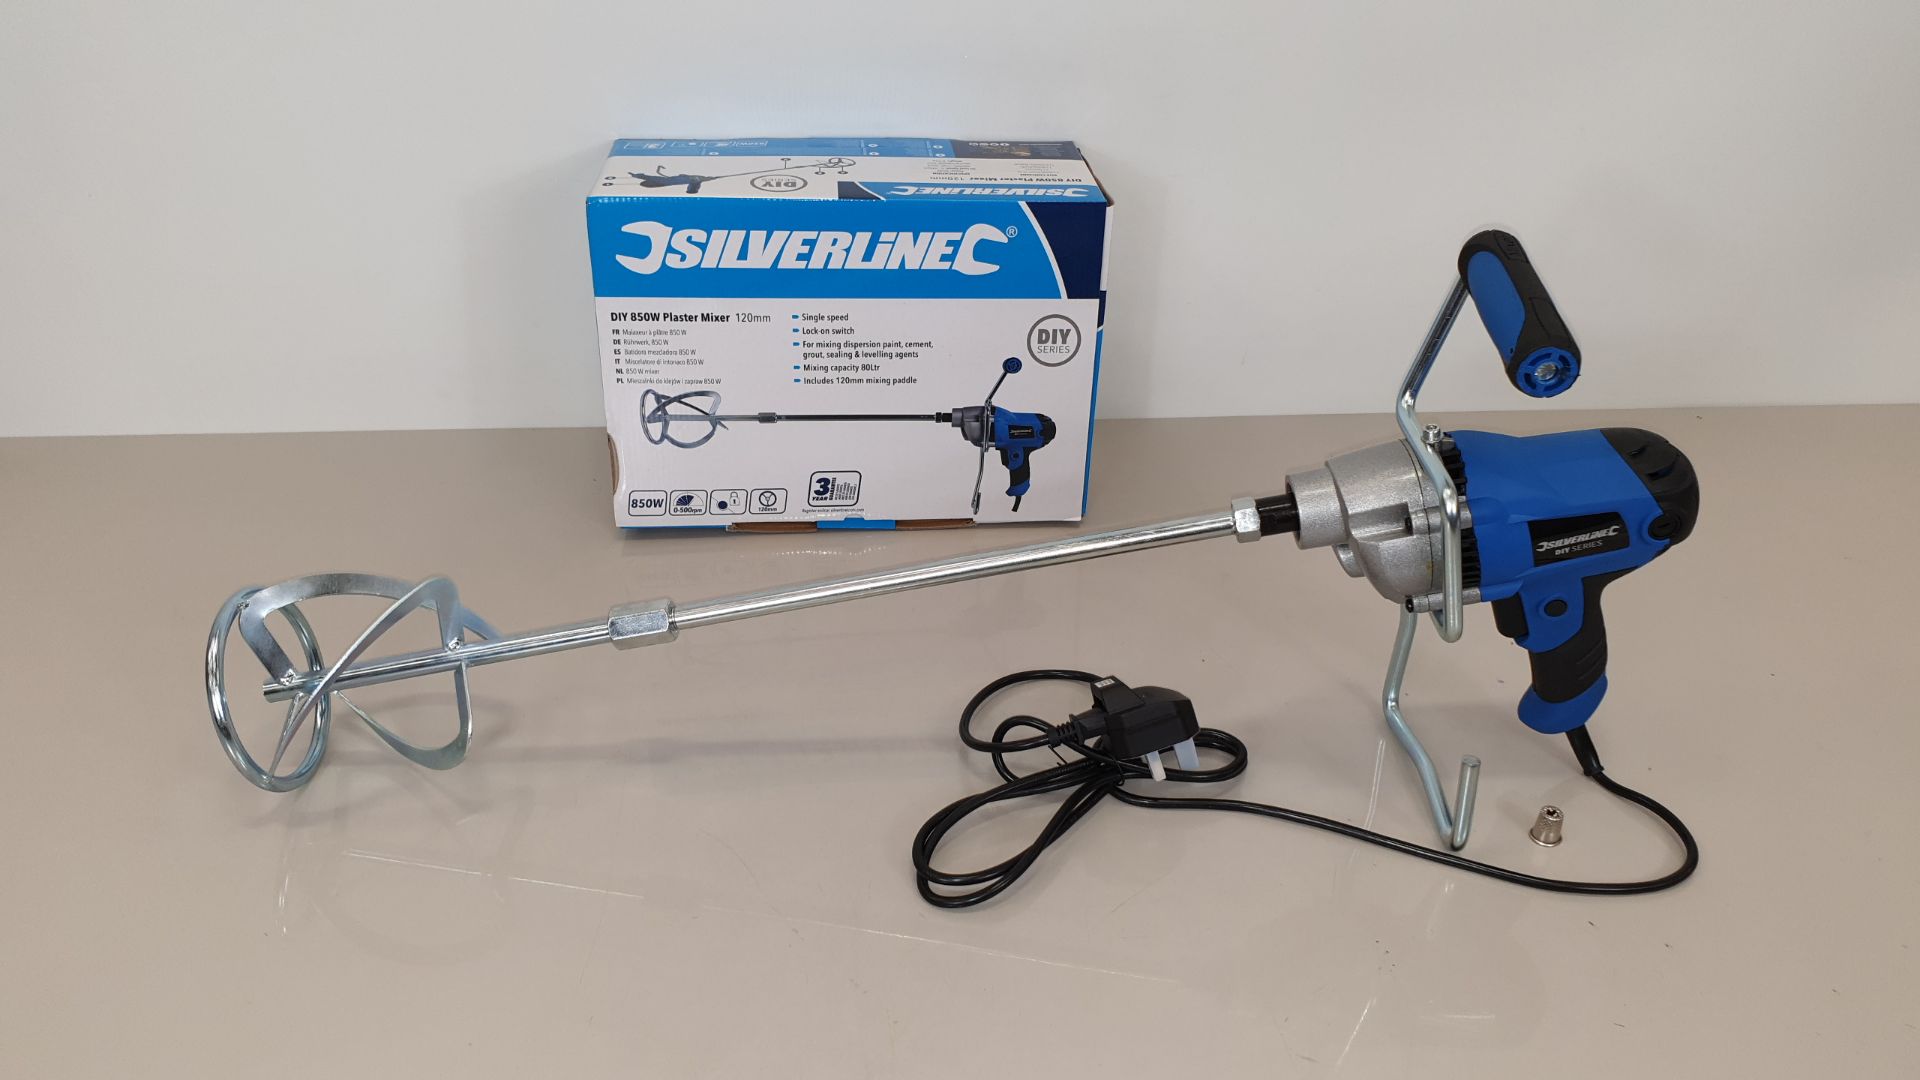 2 X BRAND NEW SILVERLINE DIY 850W PAINT / CEMENT / PLASTER MIXERS WITH 120MM DIA PADDLE, 80 LITRE